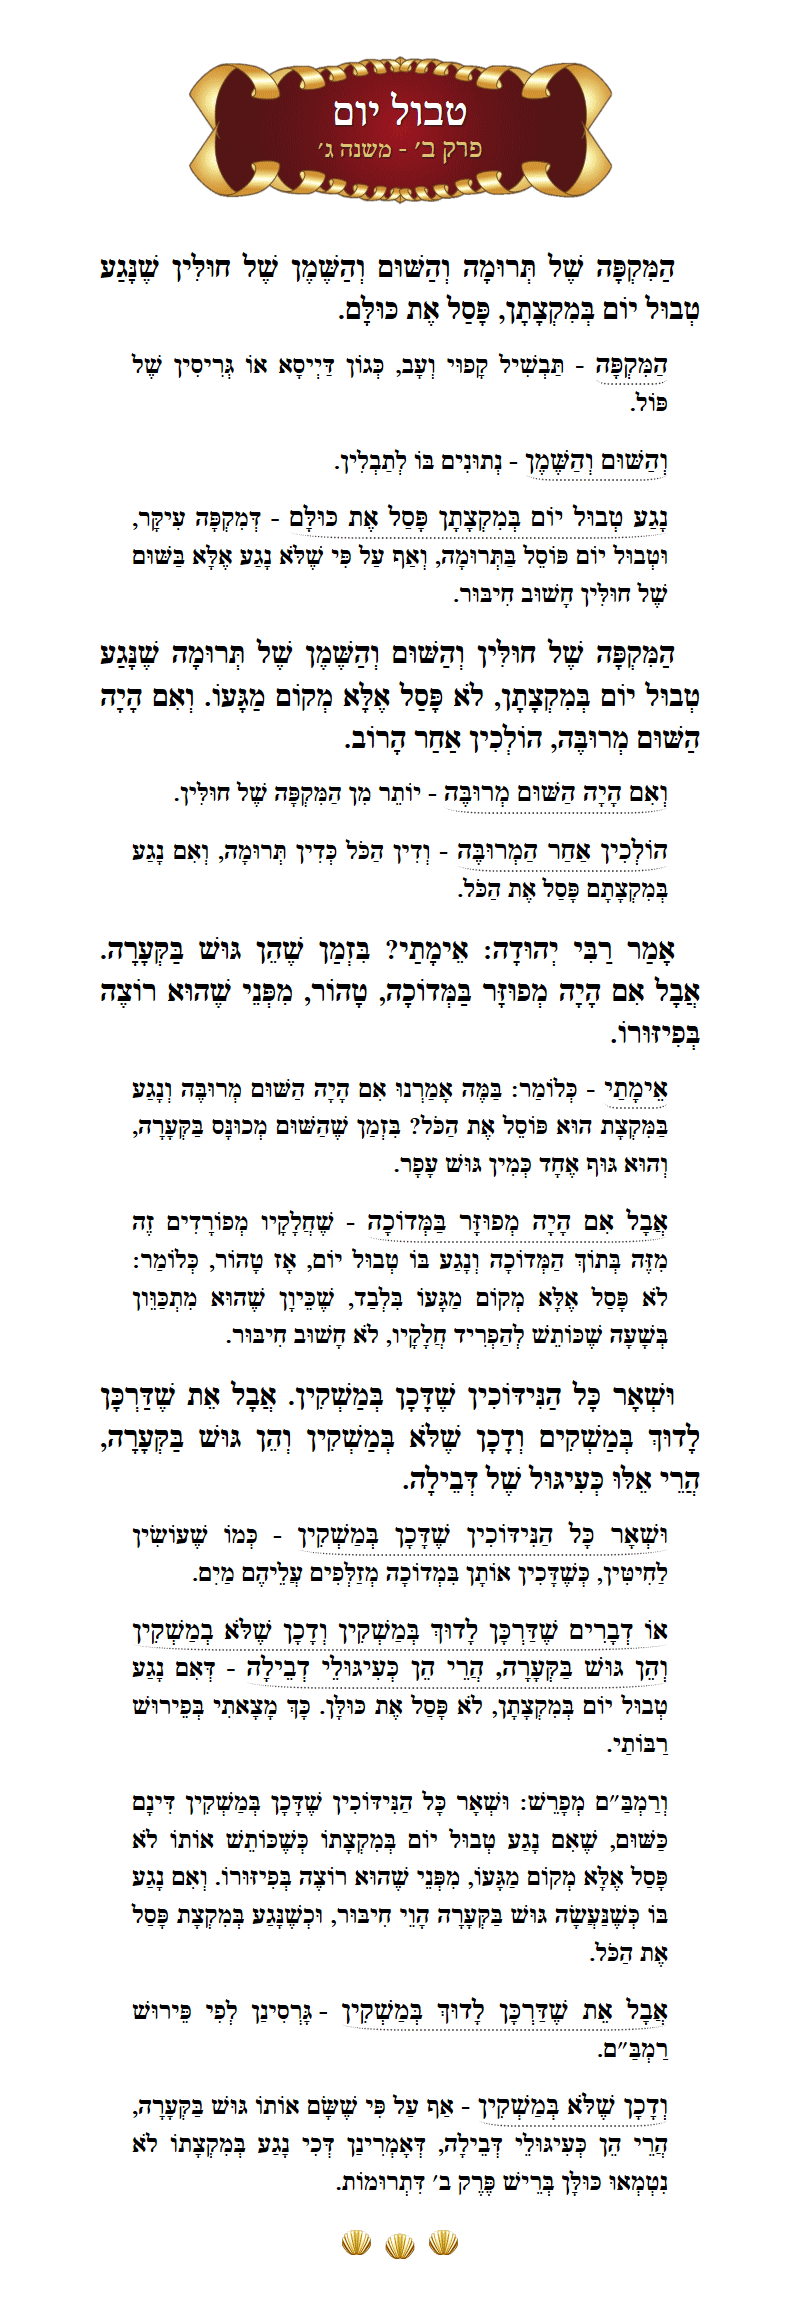 Masechta Tevul Yom Chapter 2 Mishnah 3 with commentary